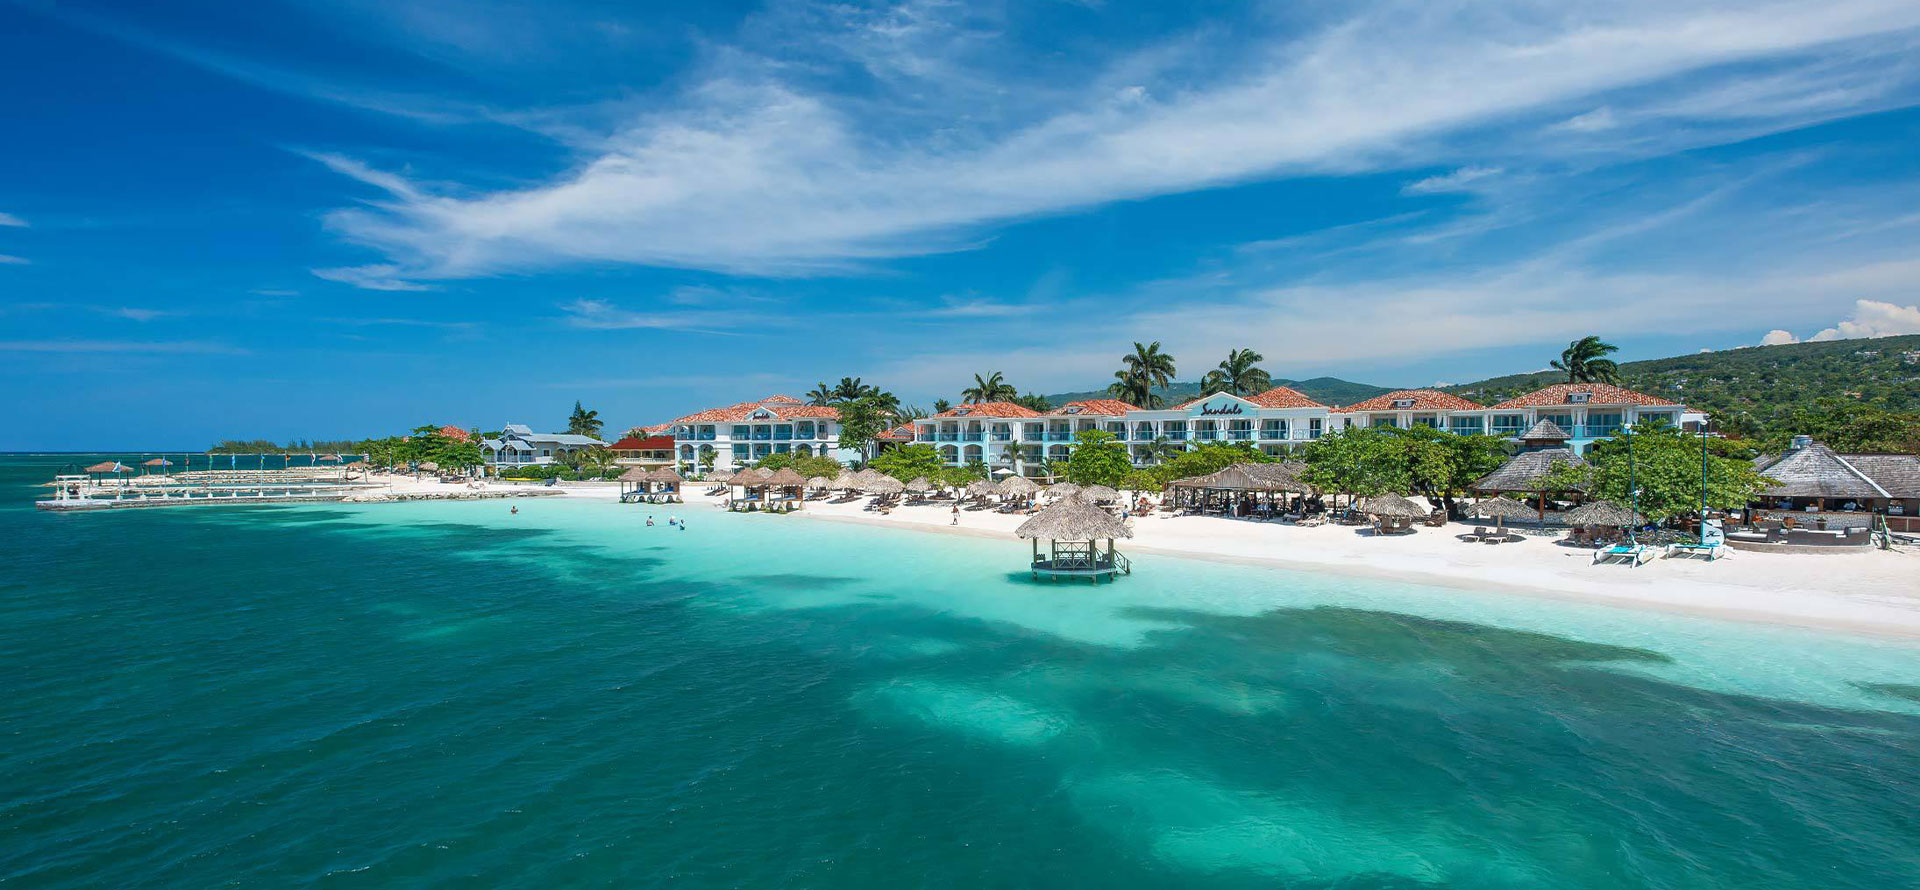 Montego bay all-inclusive adults only resorts.